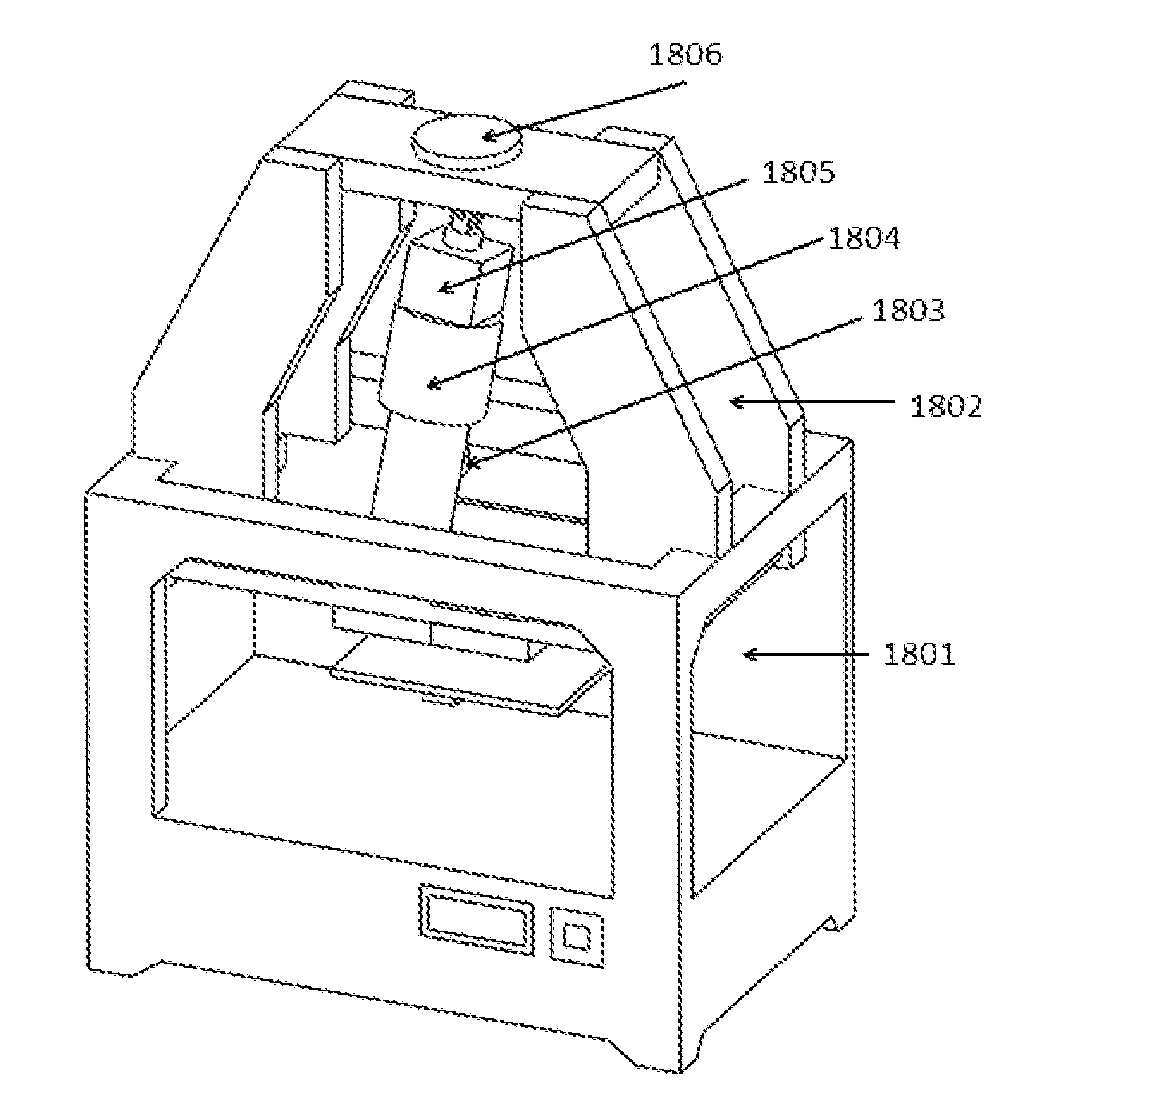 Device and Method to Additively Fabricate Structures Containing Embedded Electronics or Sensors